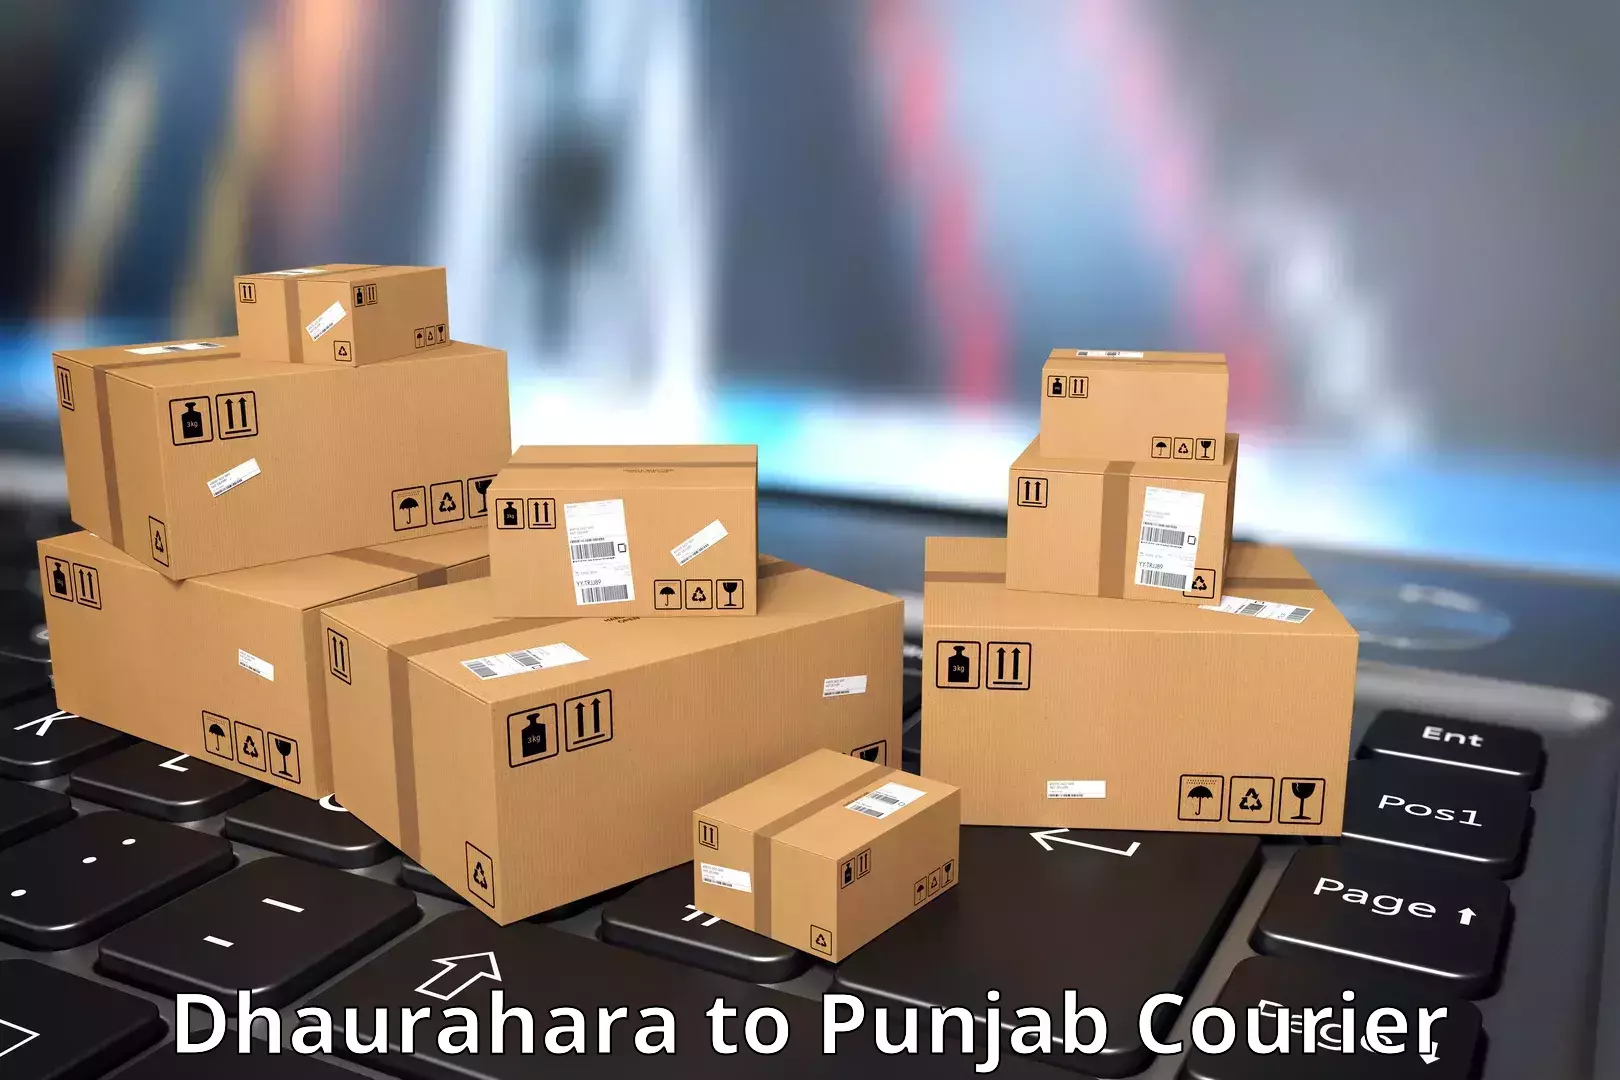 Reliable parcel services Dhaurahara to Begowal